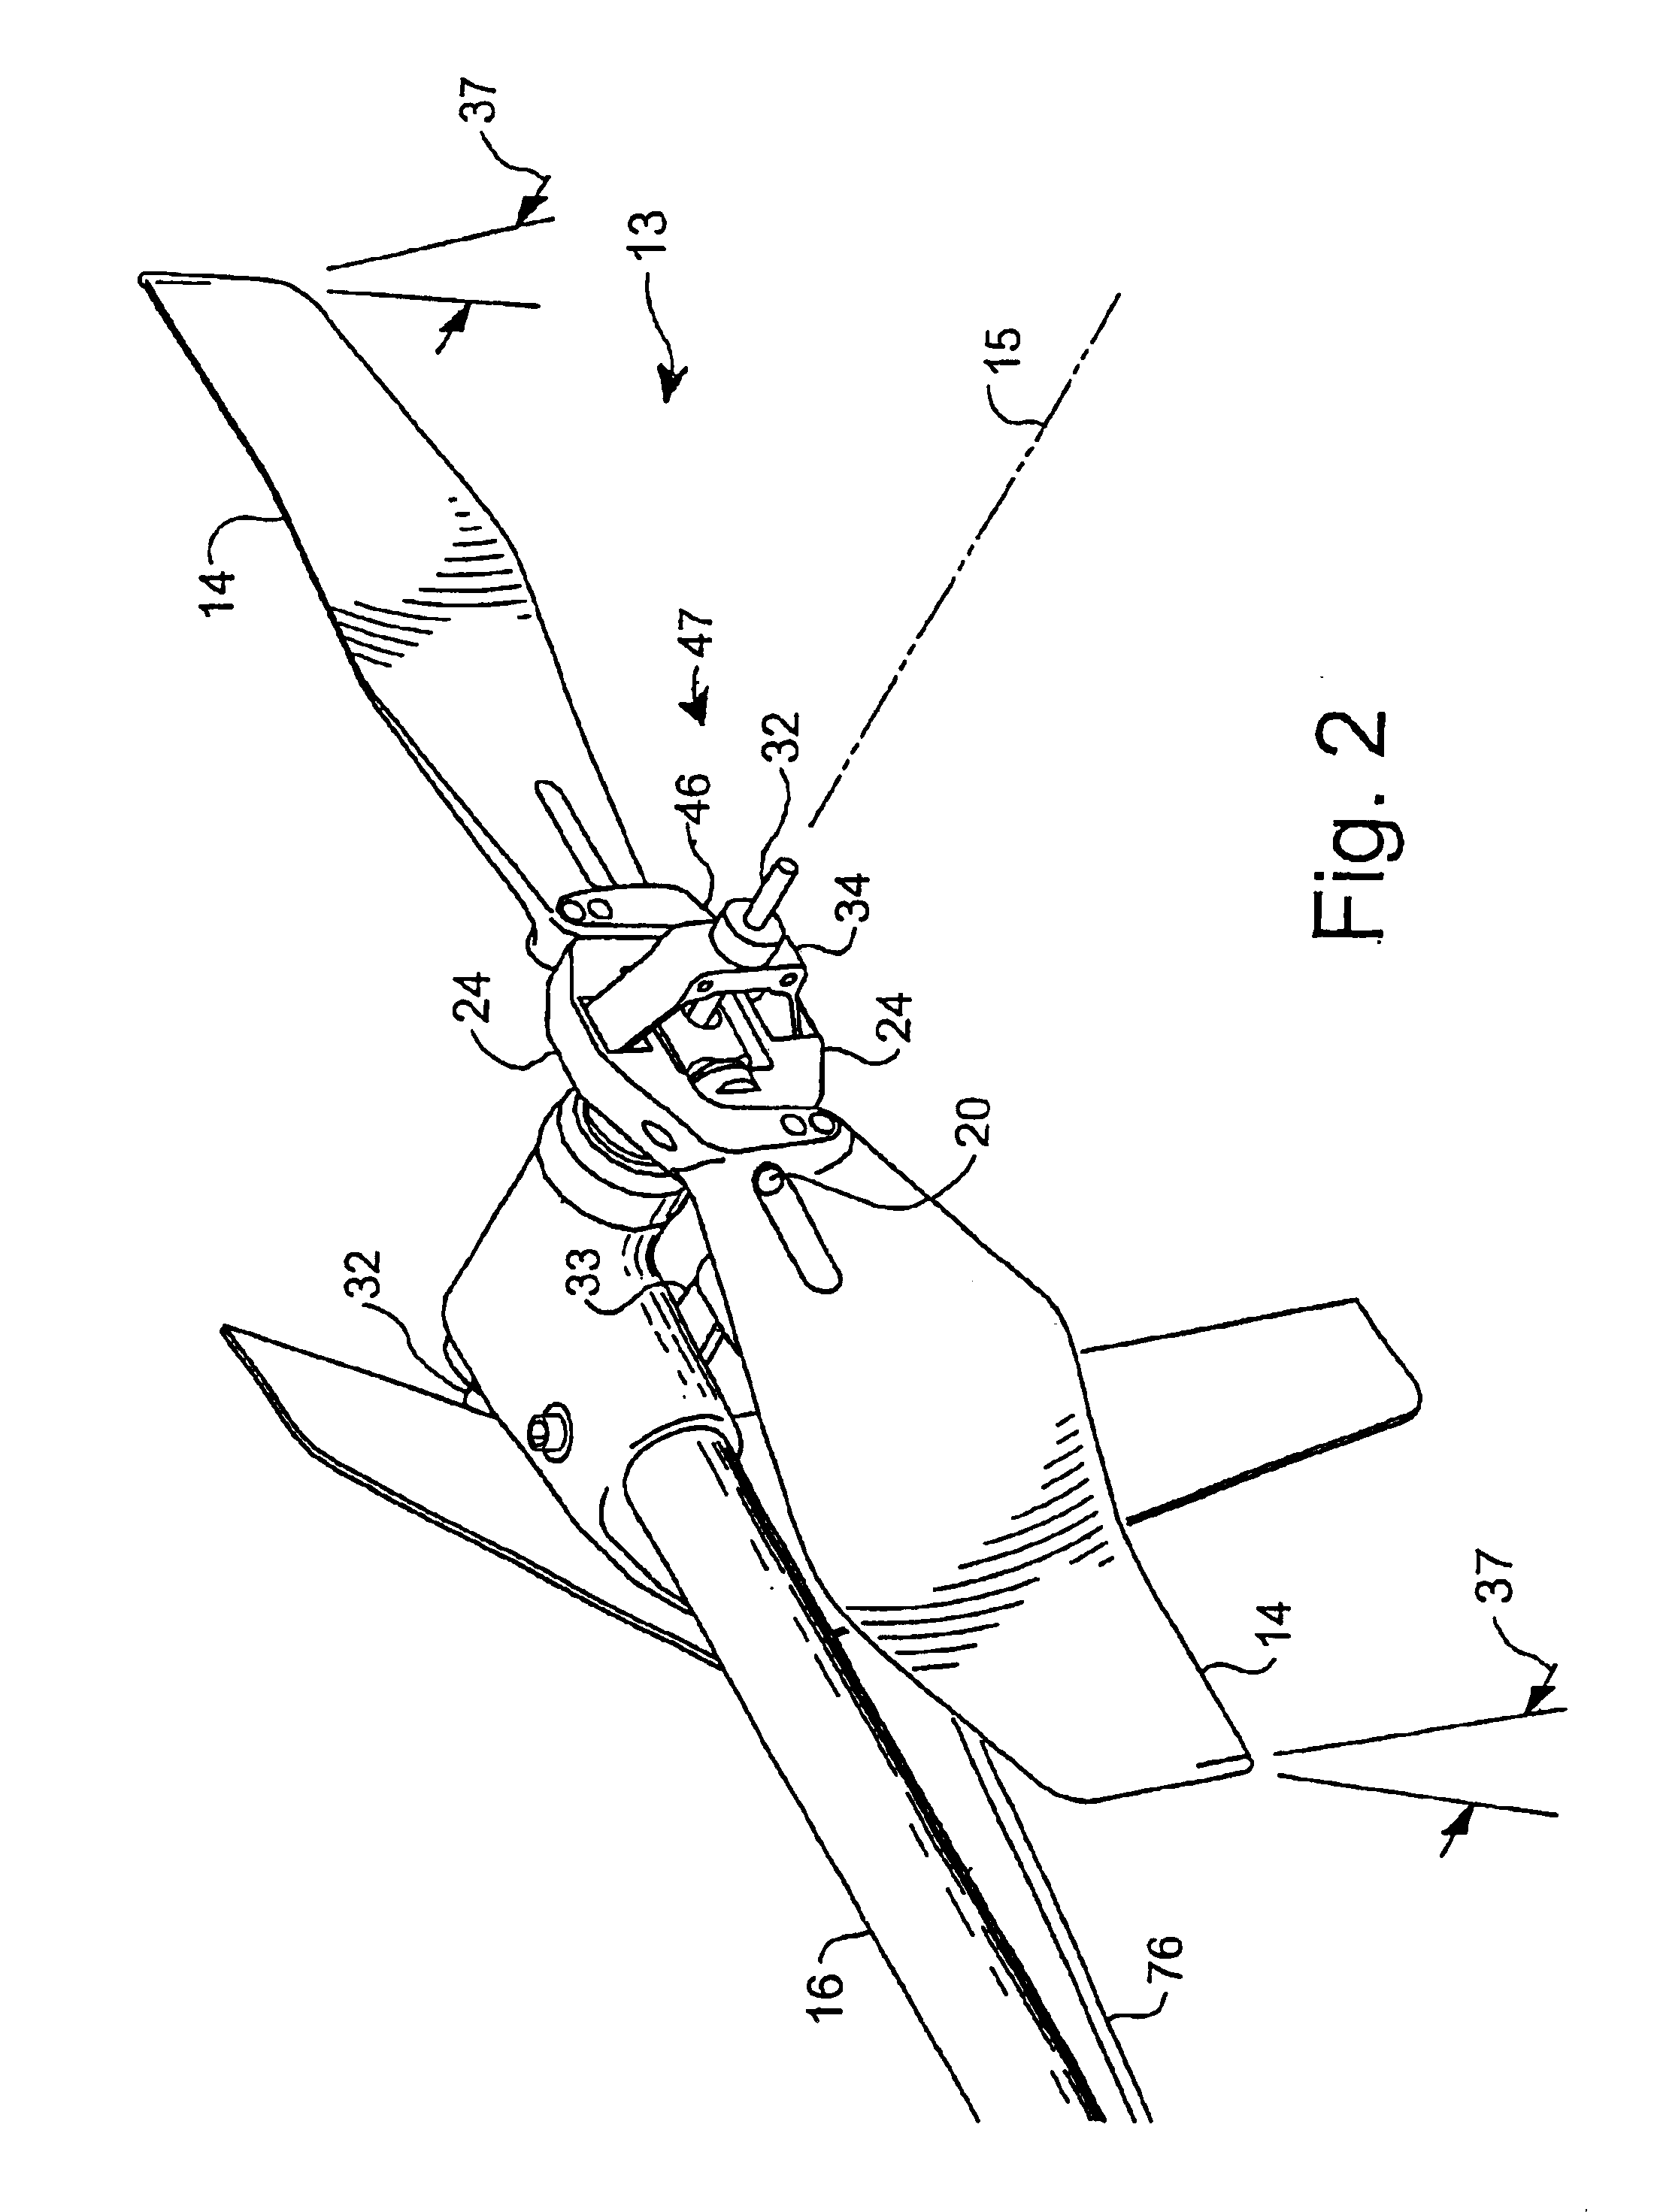 Rotor system for helicopters